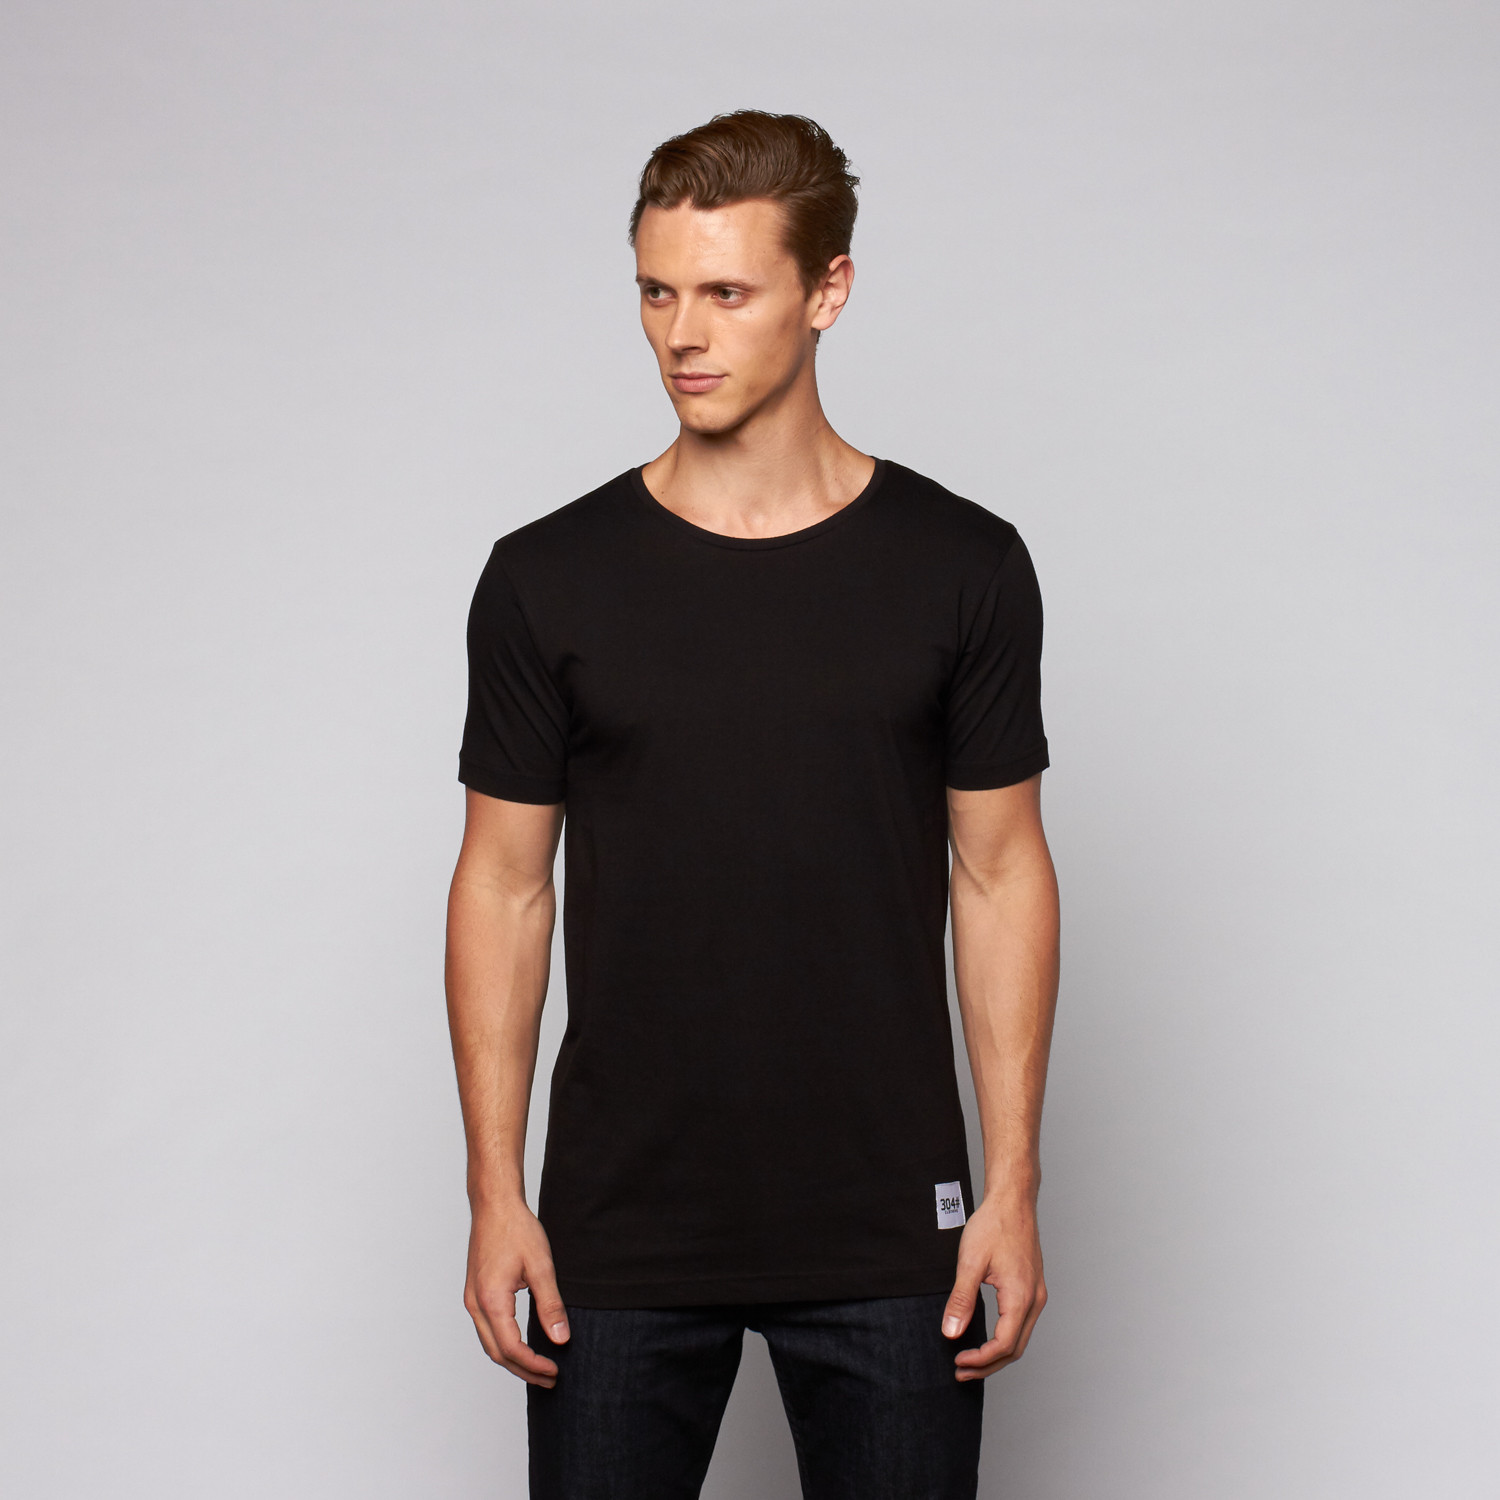 Cloud 9 T-Shirt // Black (M) - Apparel Clearance - Touch of Modern